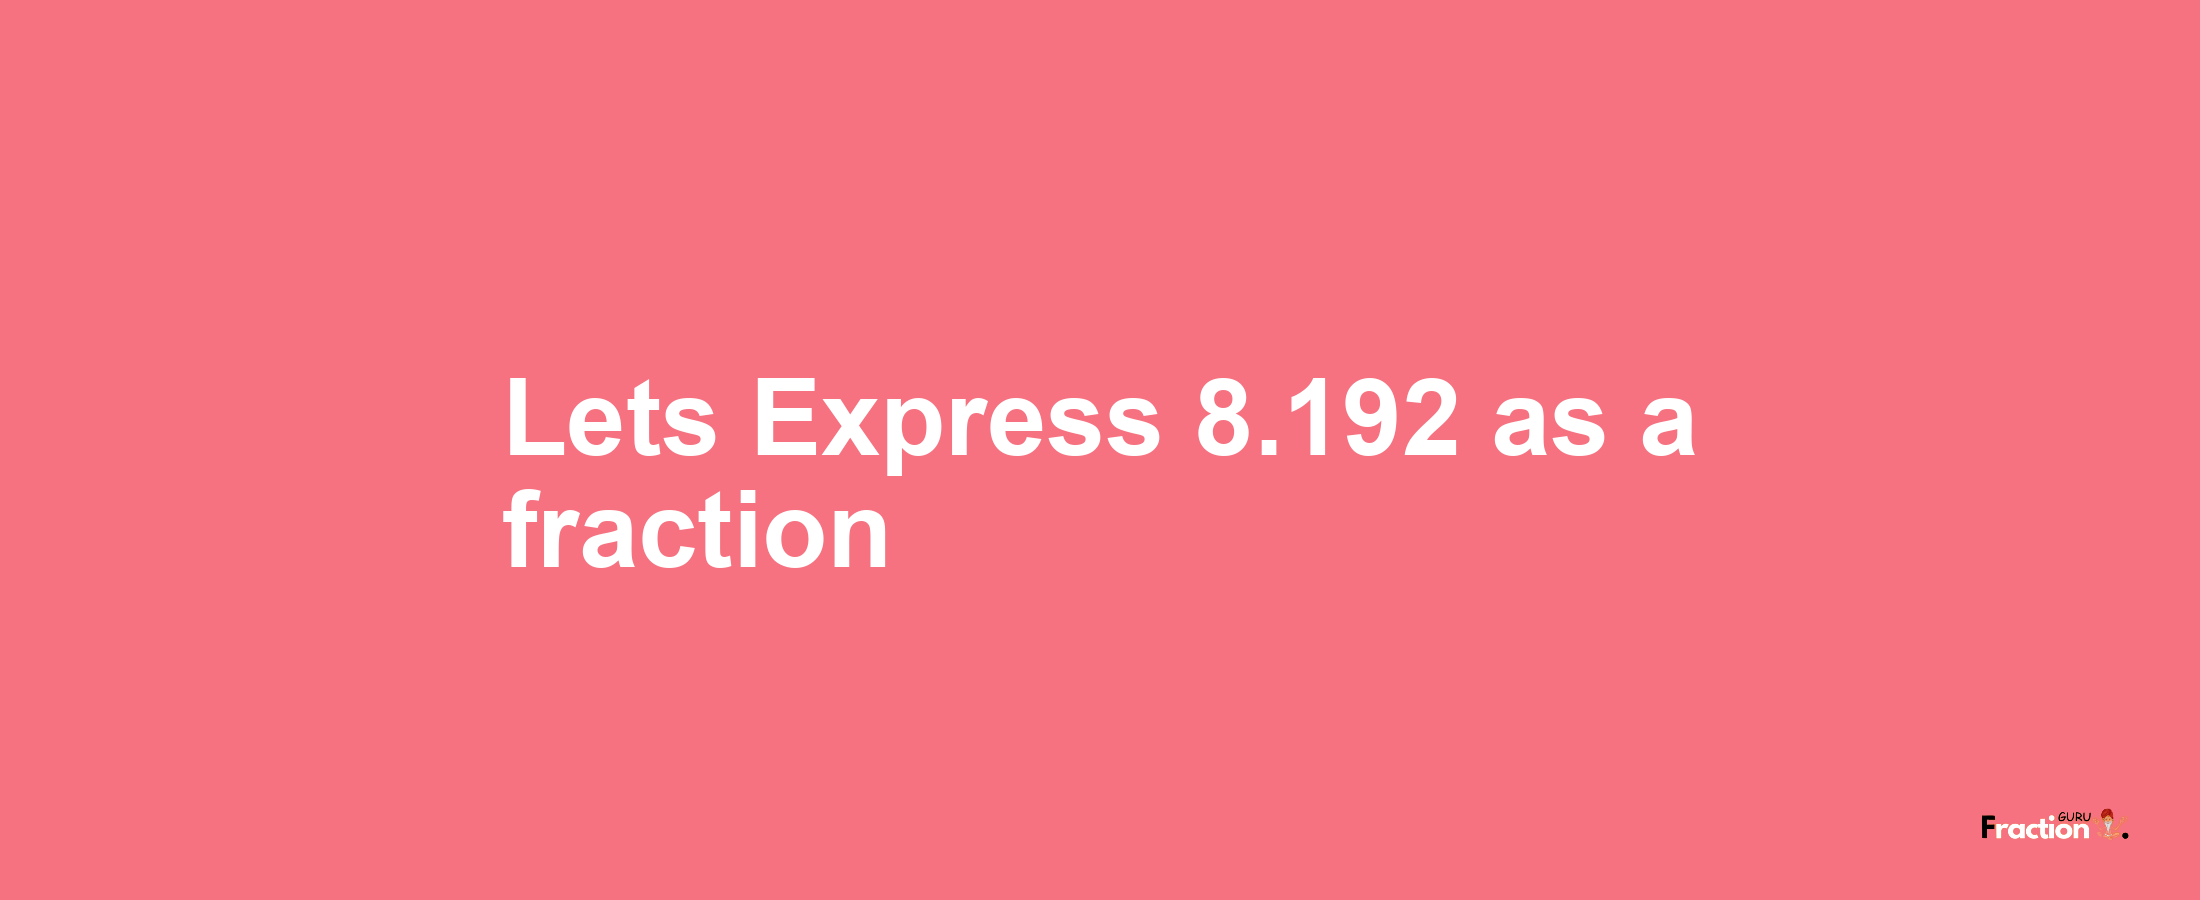 Lets Express 8.192 as afraction